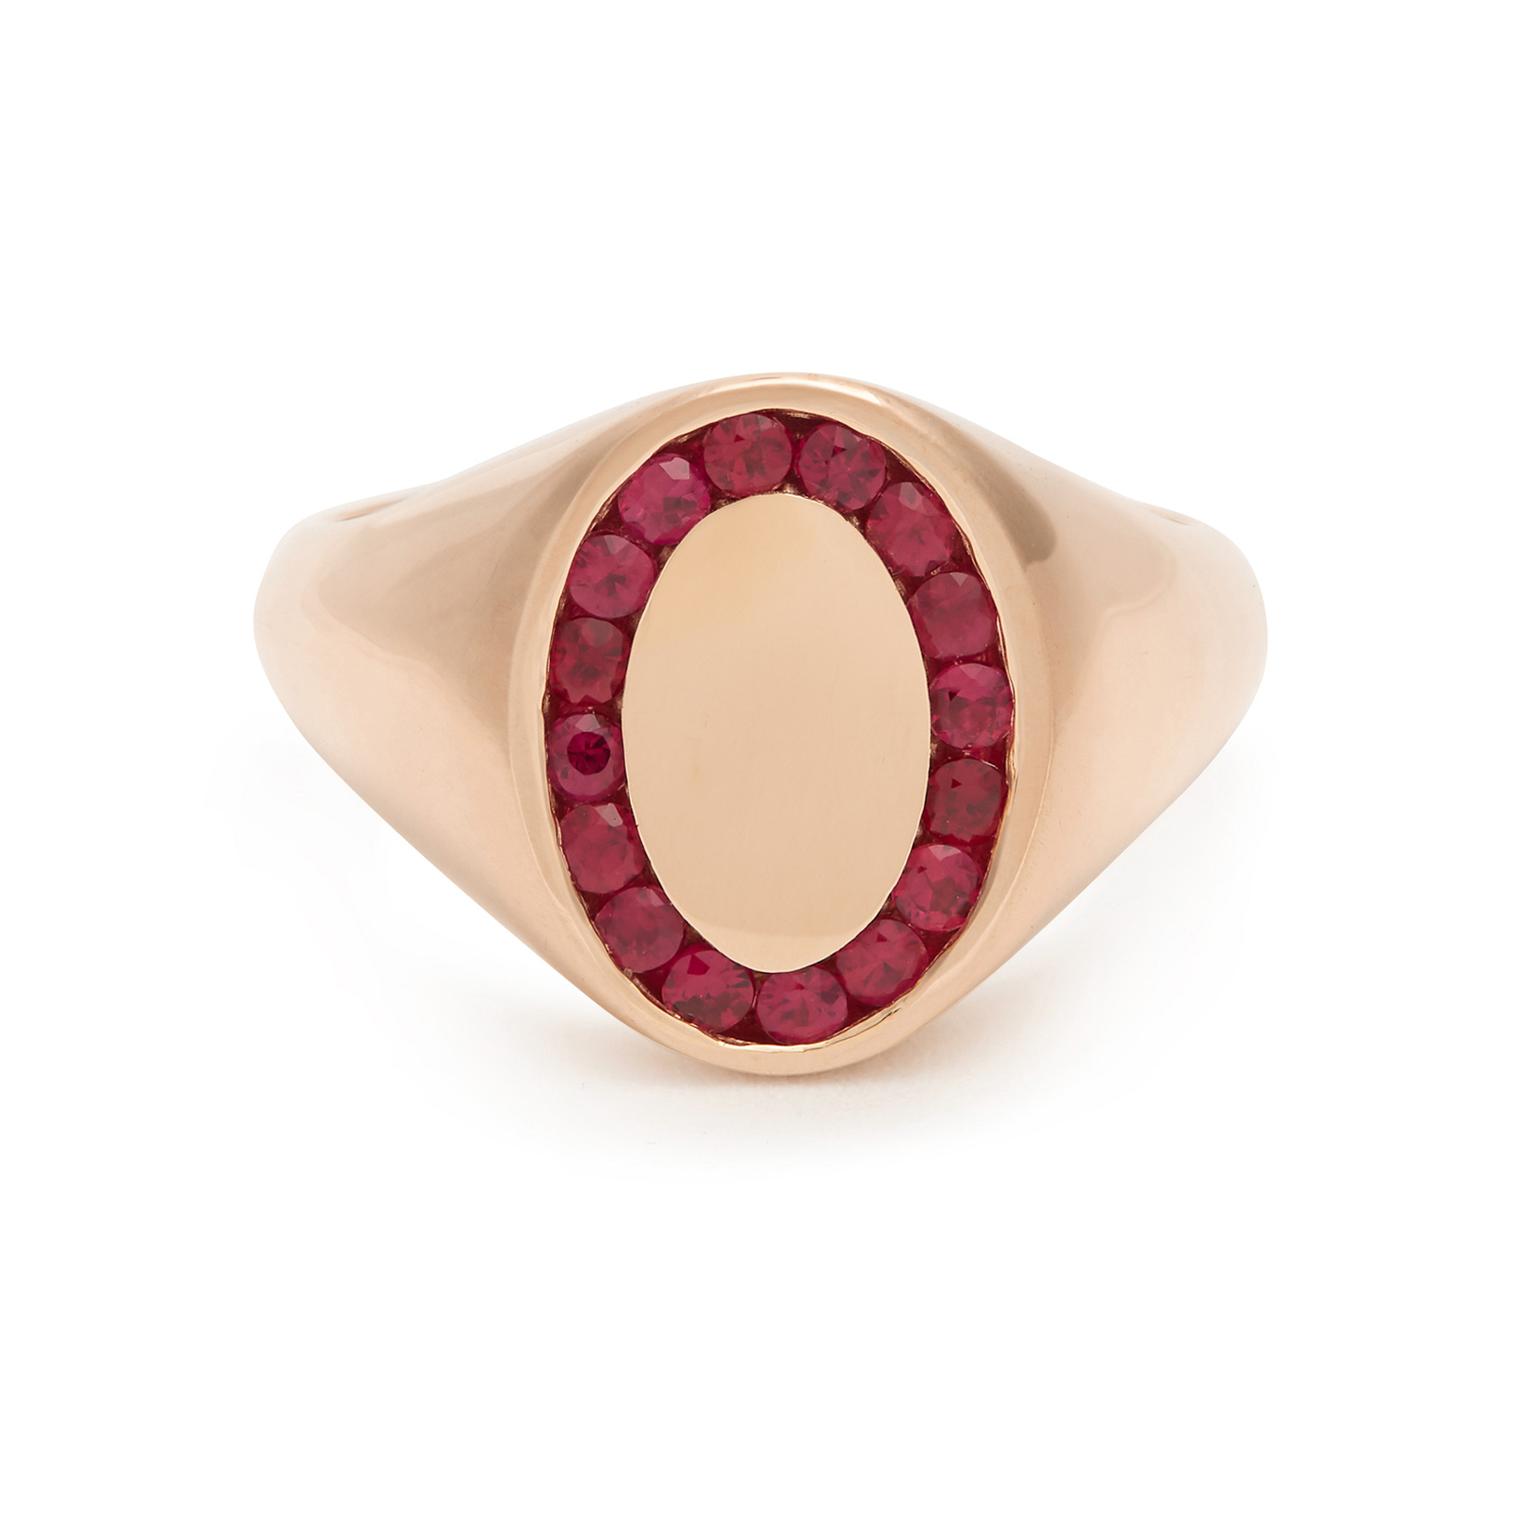 Jessica Biales Candy ruby signet ring